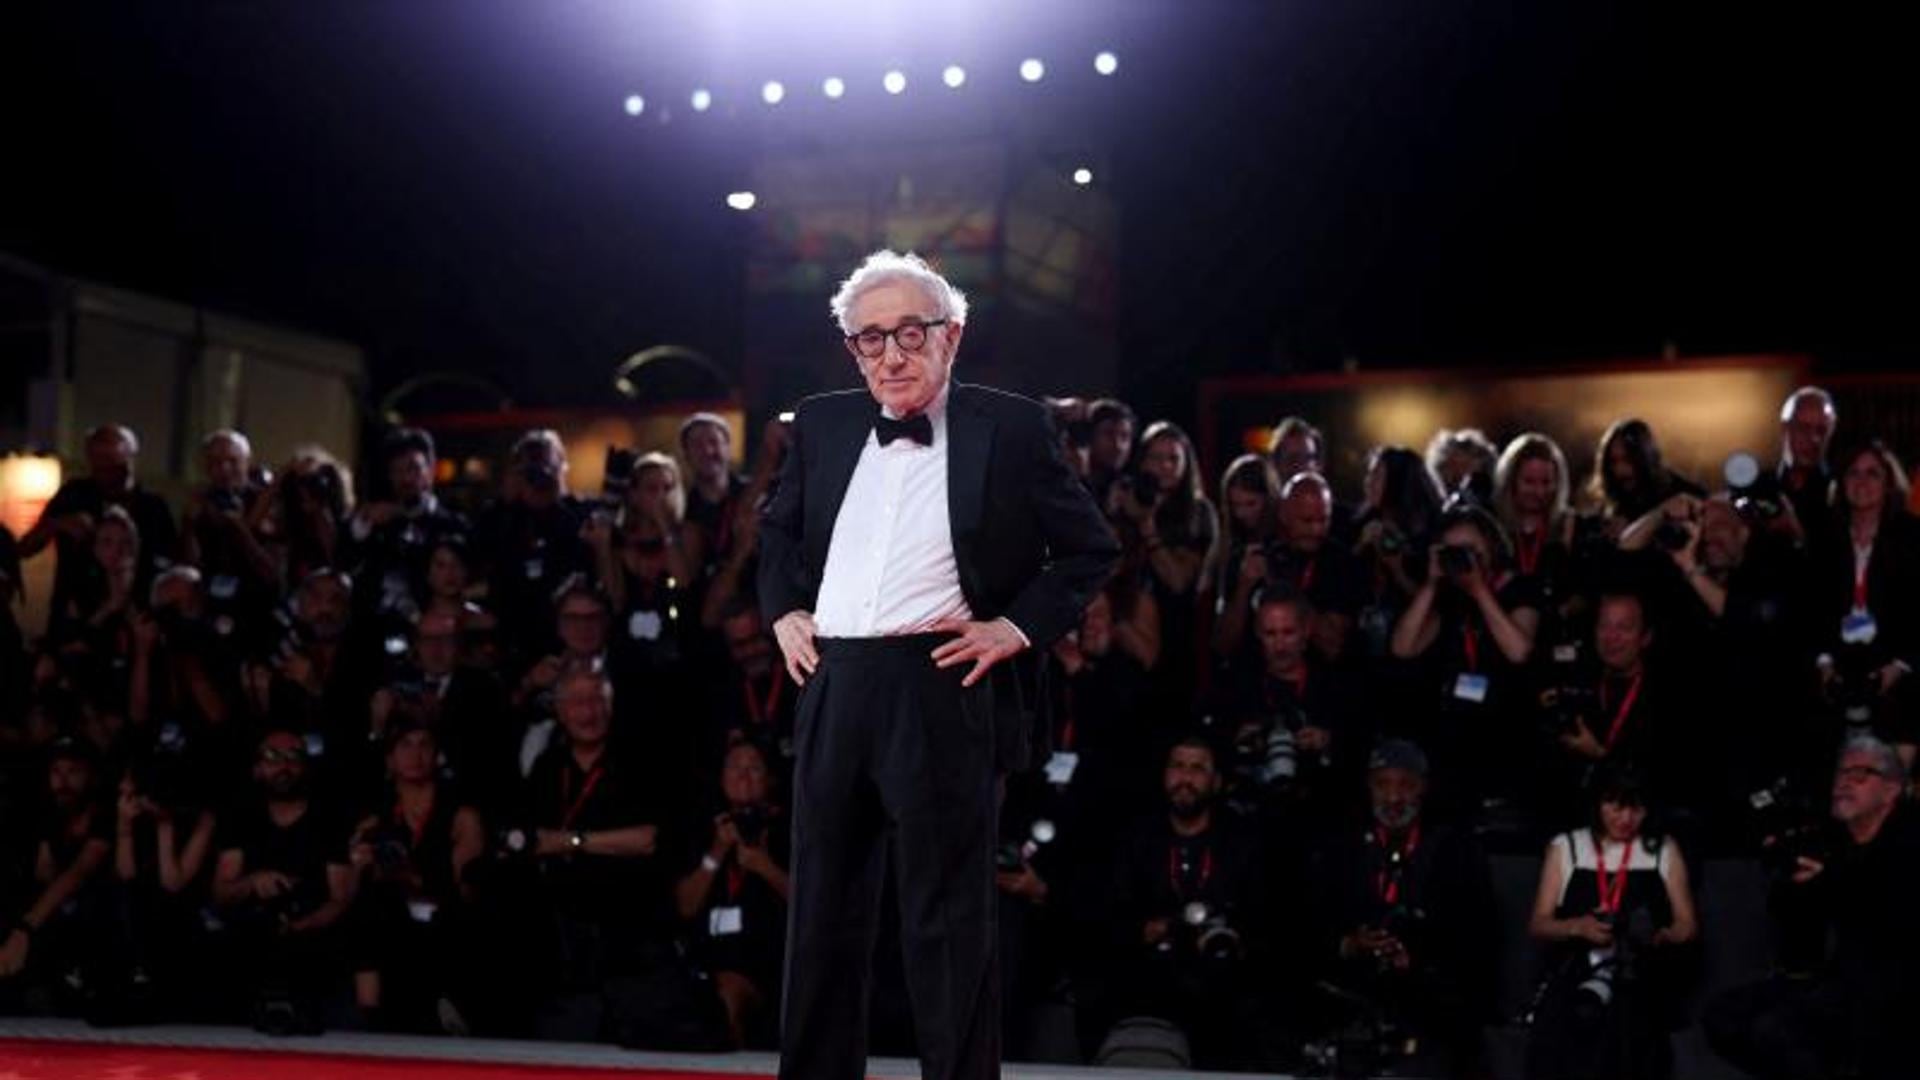 “There is an atmosphere of a witch hunt,” says Woody Allen in Venice